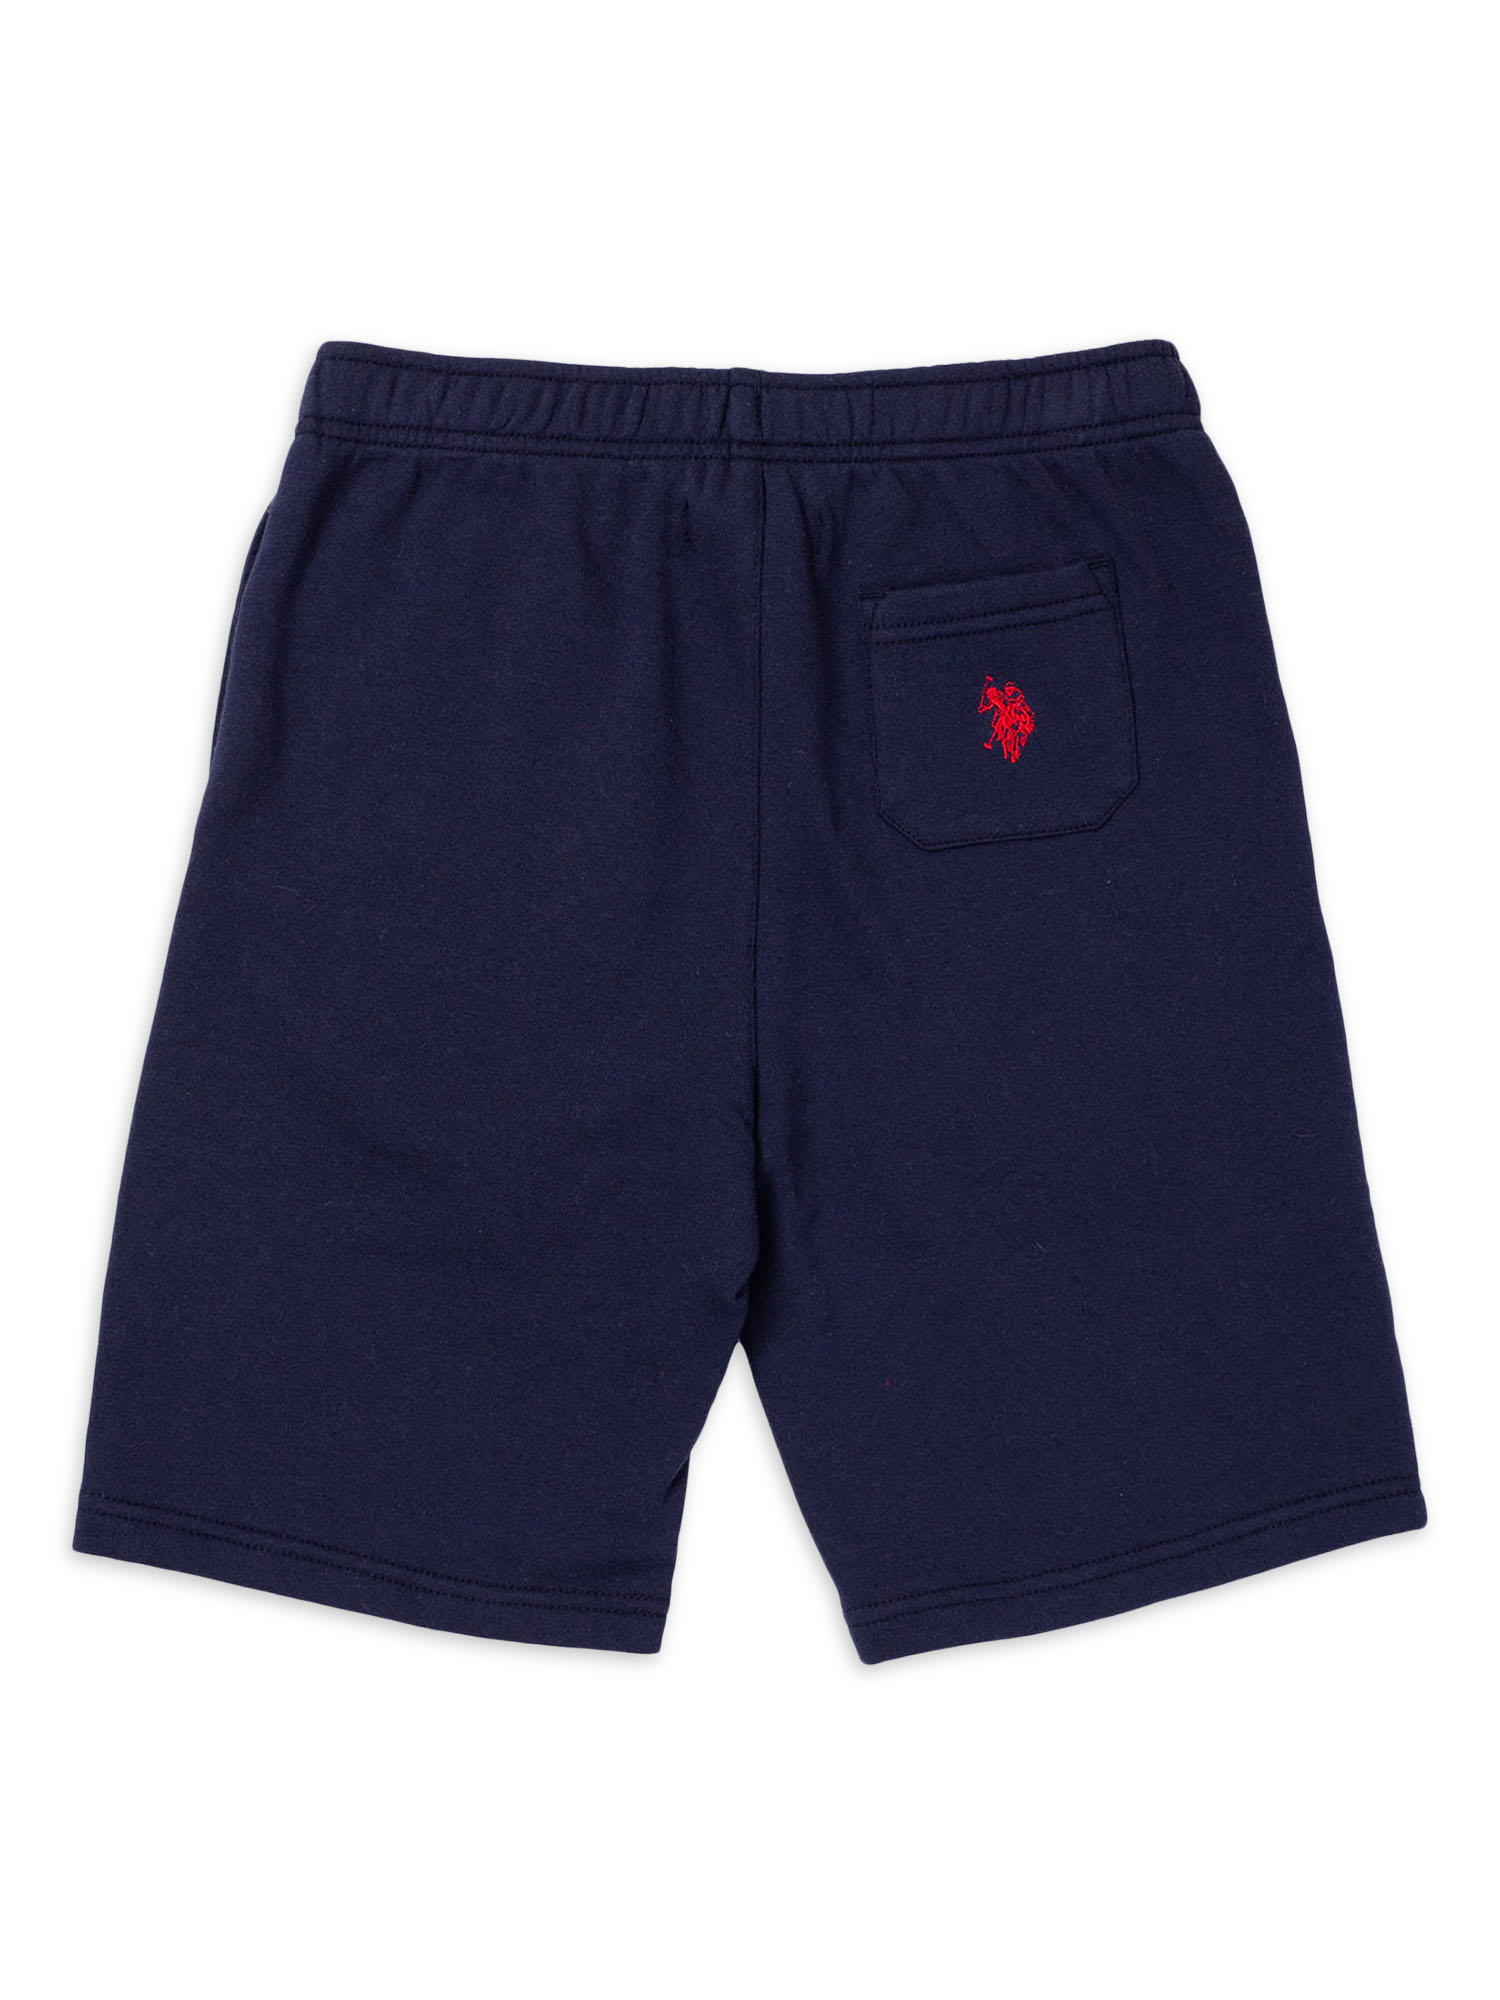 U.S Polo Assn. Performance Fleece 2-Pack Shorts, Sizes 4-18 - image 3 of 4